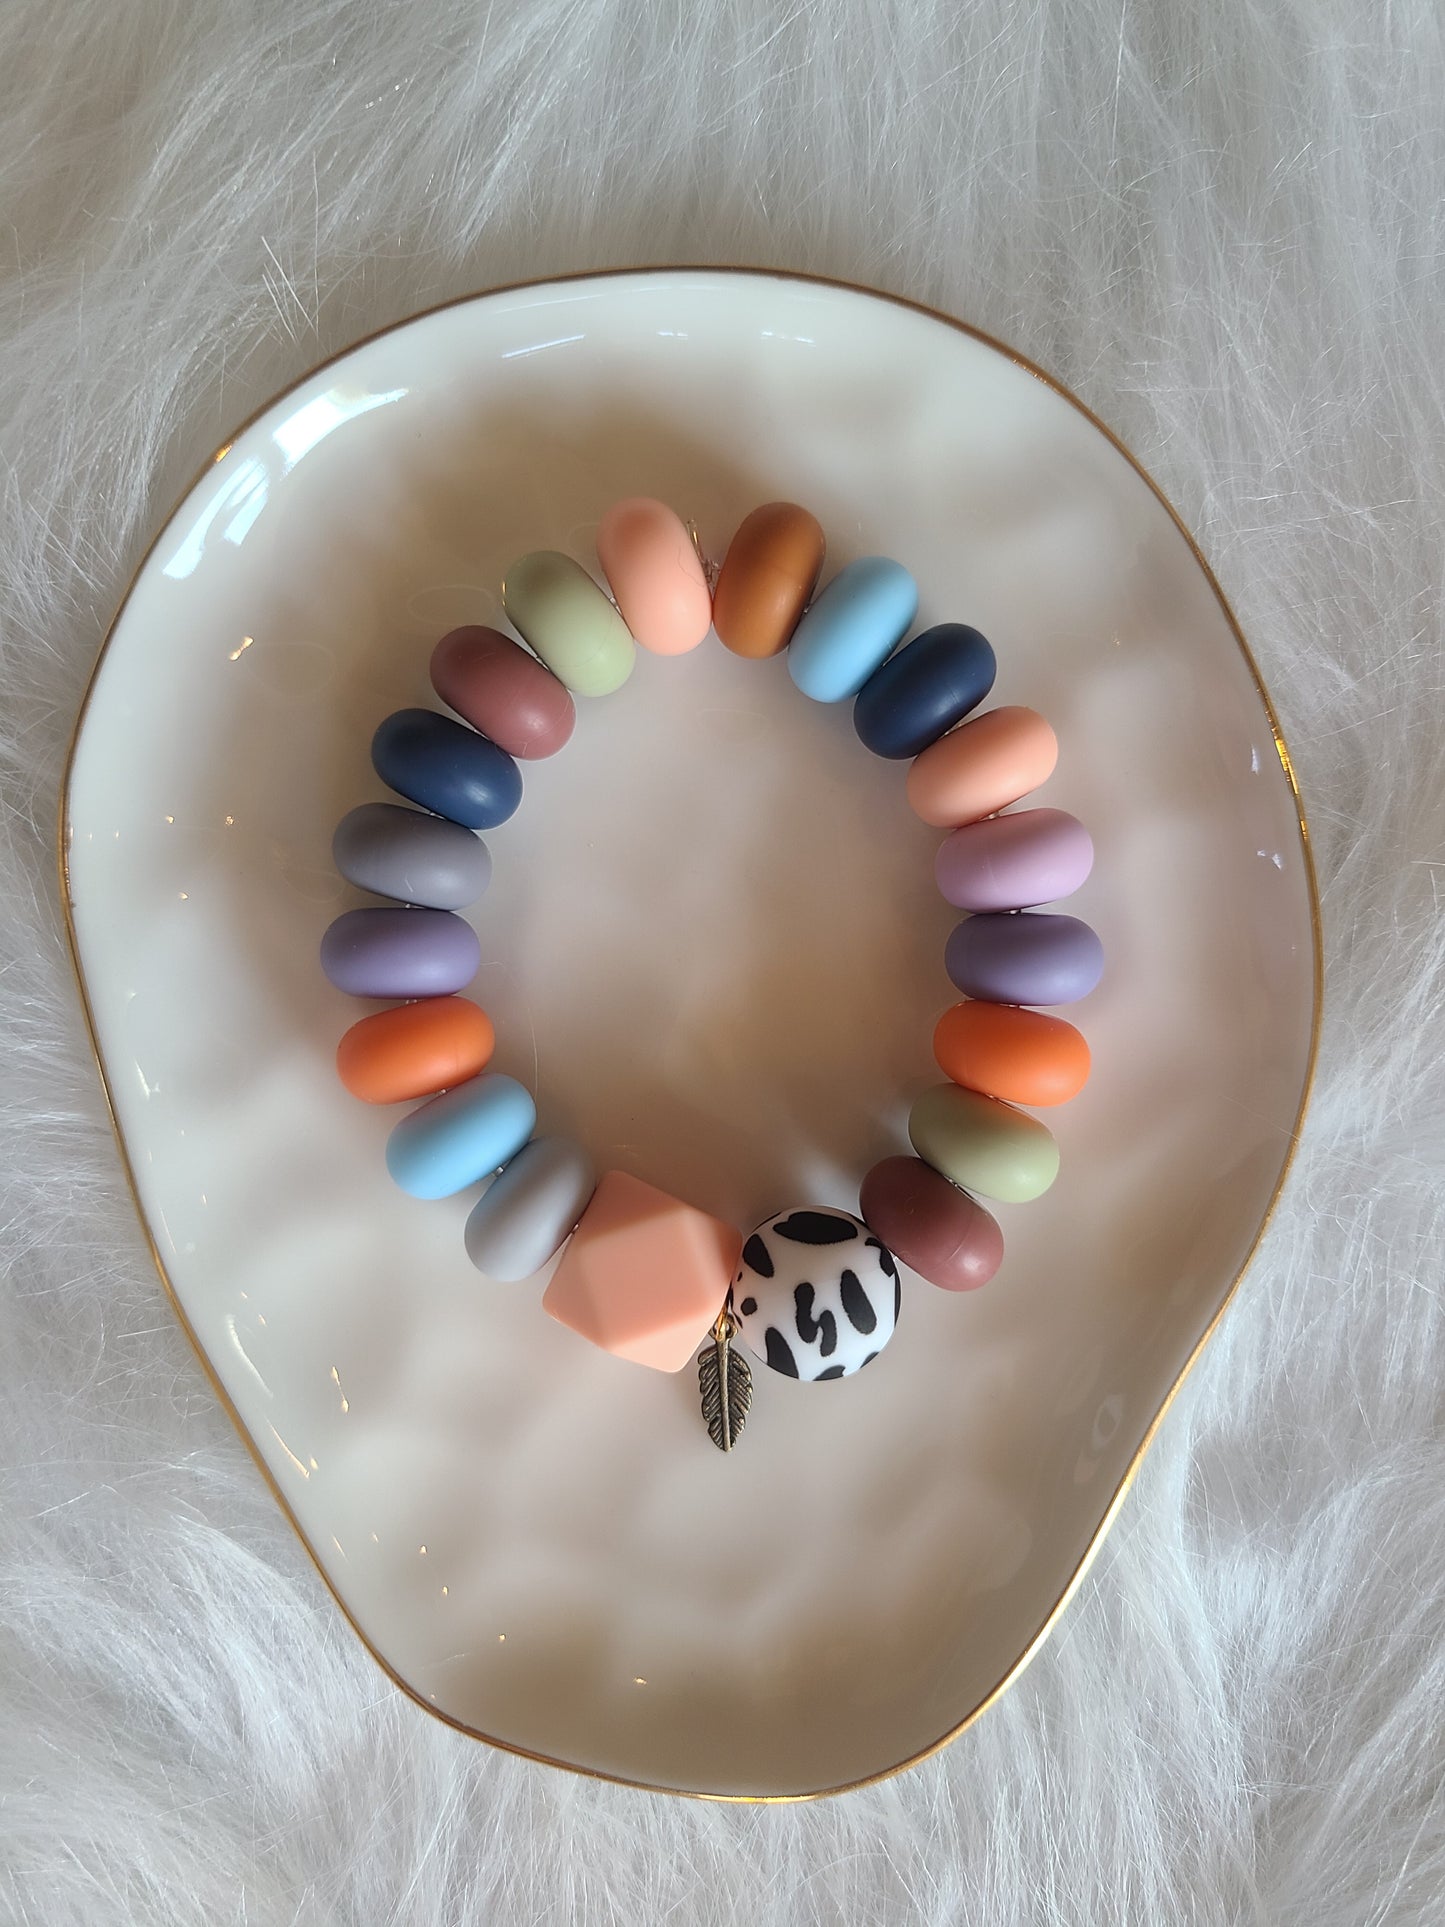 Mixed Media Multicolor Silicone Bead Bracelet and Necklace Set